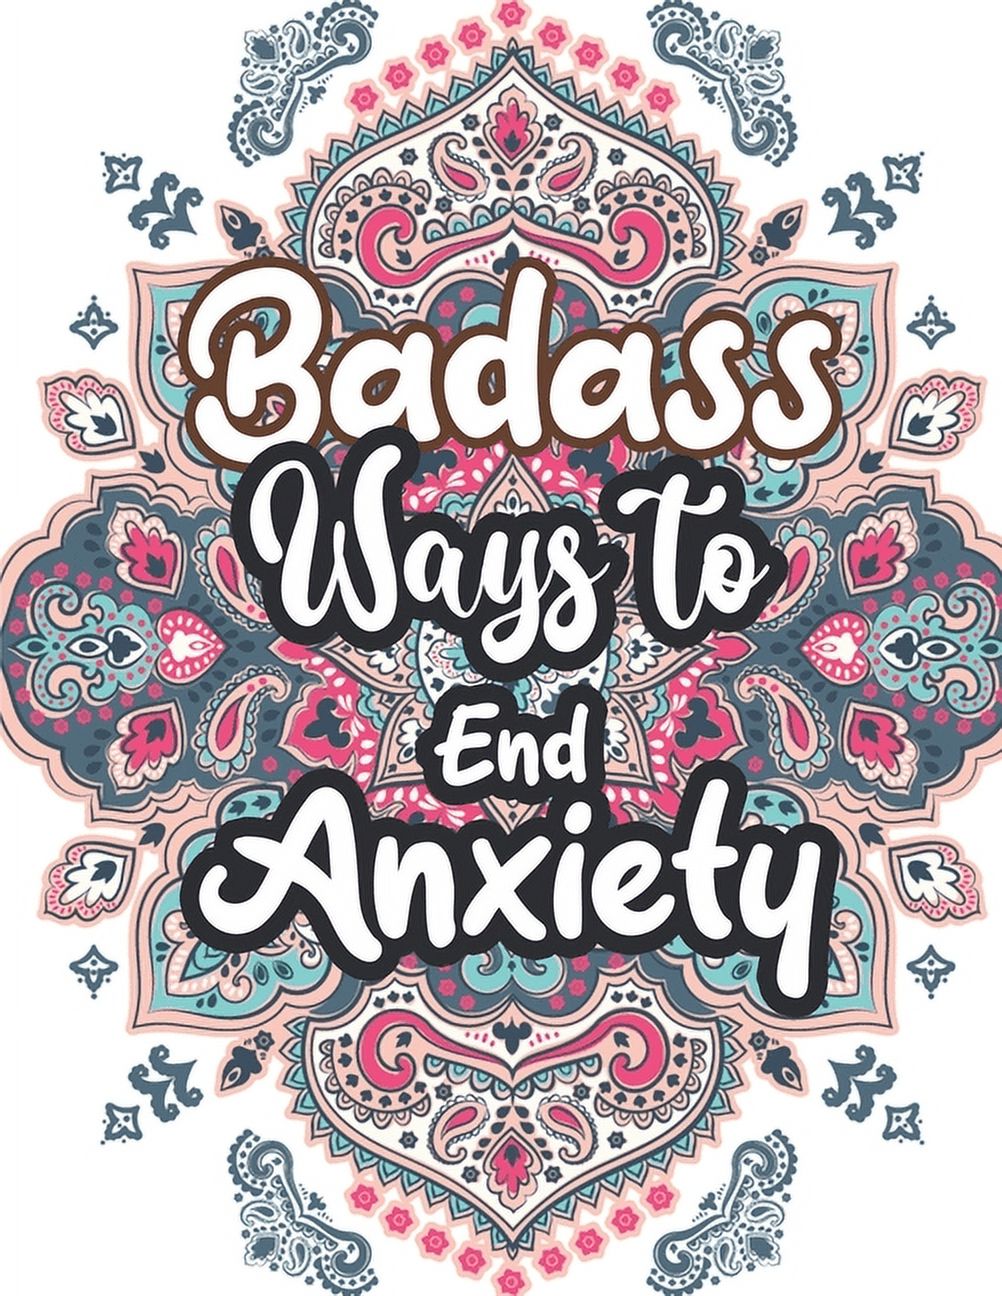 Badass Ways to End Anxiety: Christmas Pattern Anti Anxiety Coloring Book, Relaxation and Stress Reduction Color Therapy for Adults, Girls and Teens. [Book]